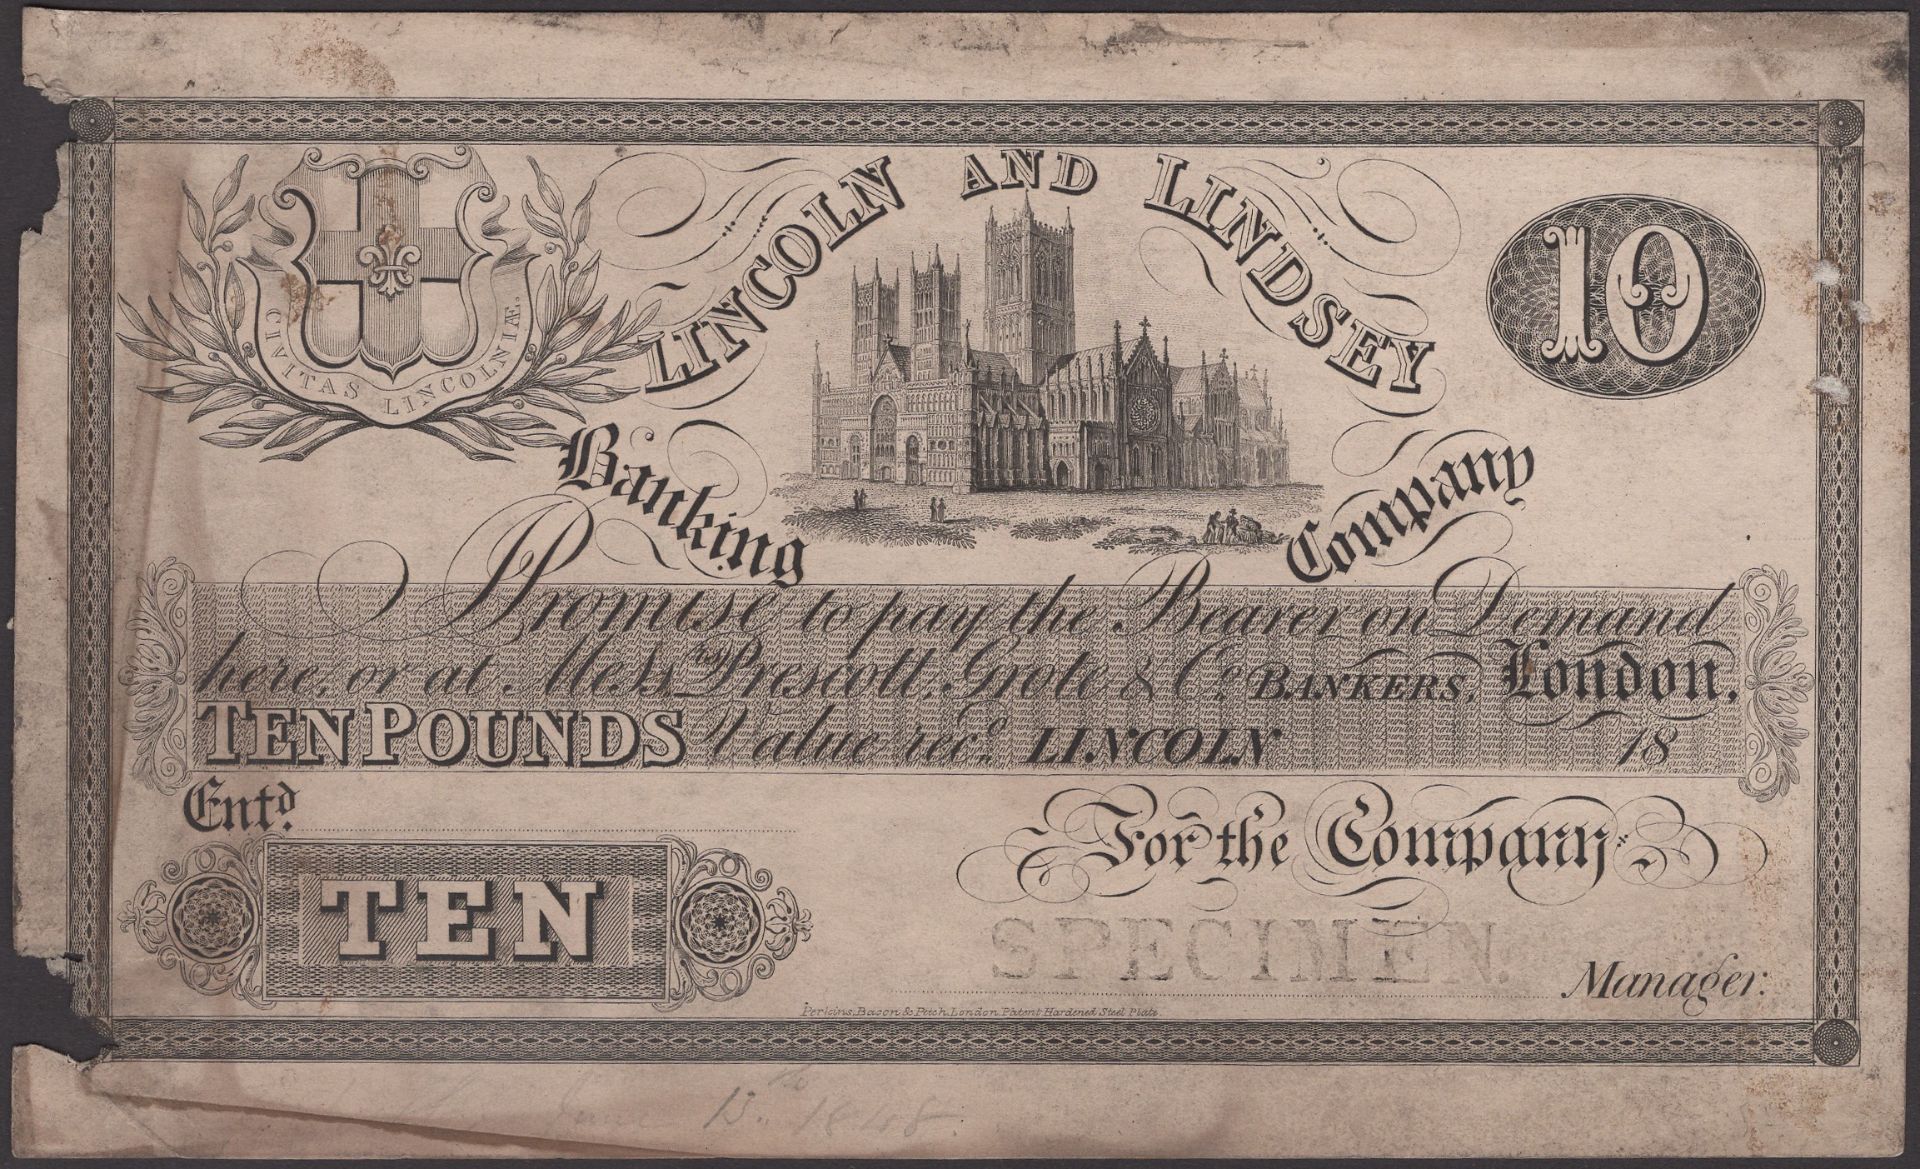 Lincoln and Lindsey Banking Company, Lincoln, specimen Â£10, 18-, no serial number, printed o...